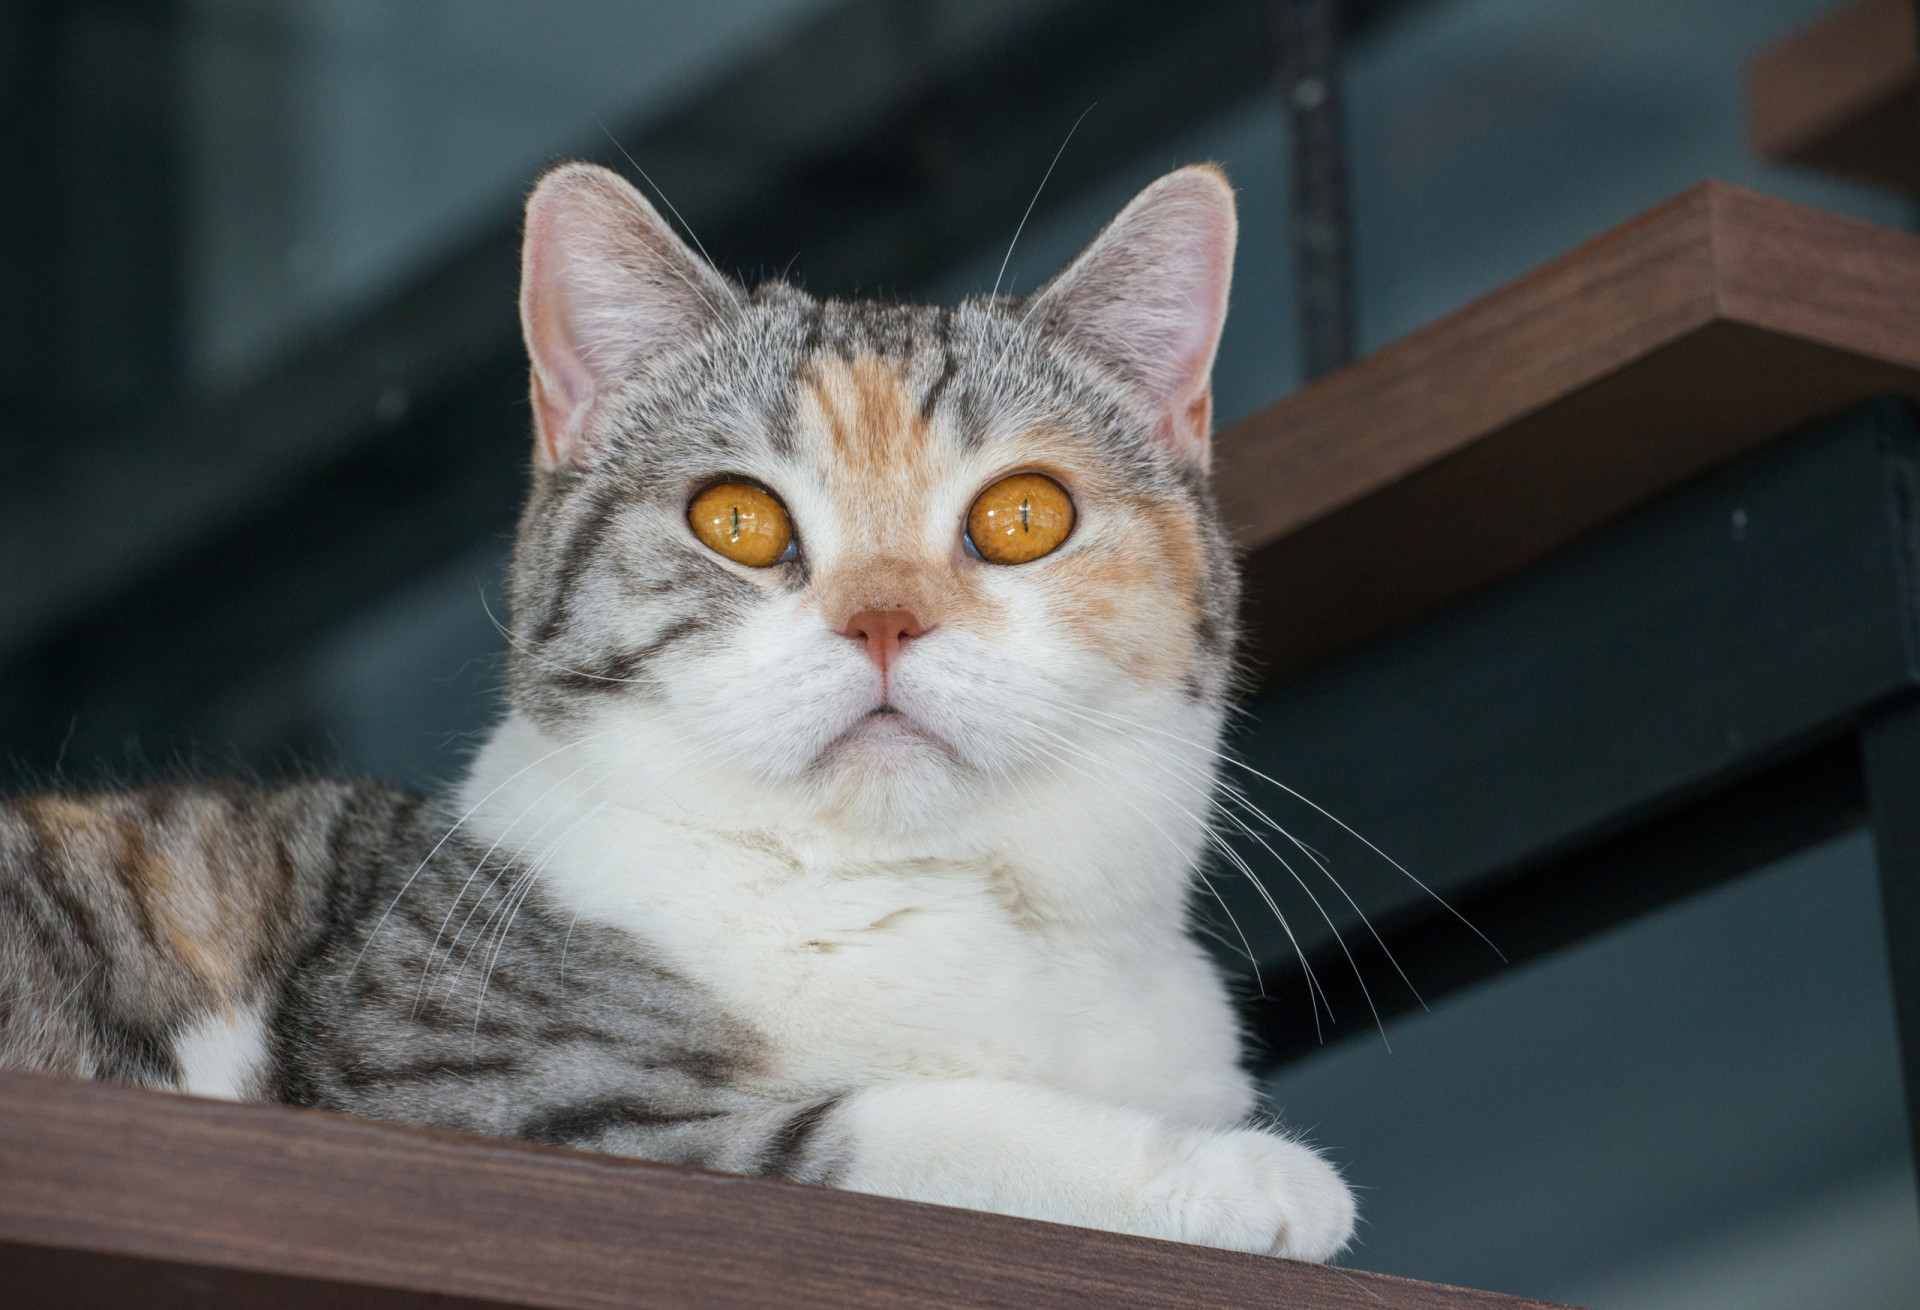 Rare cat breeds you've probably never heard of